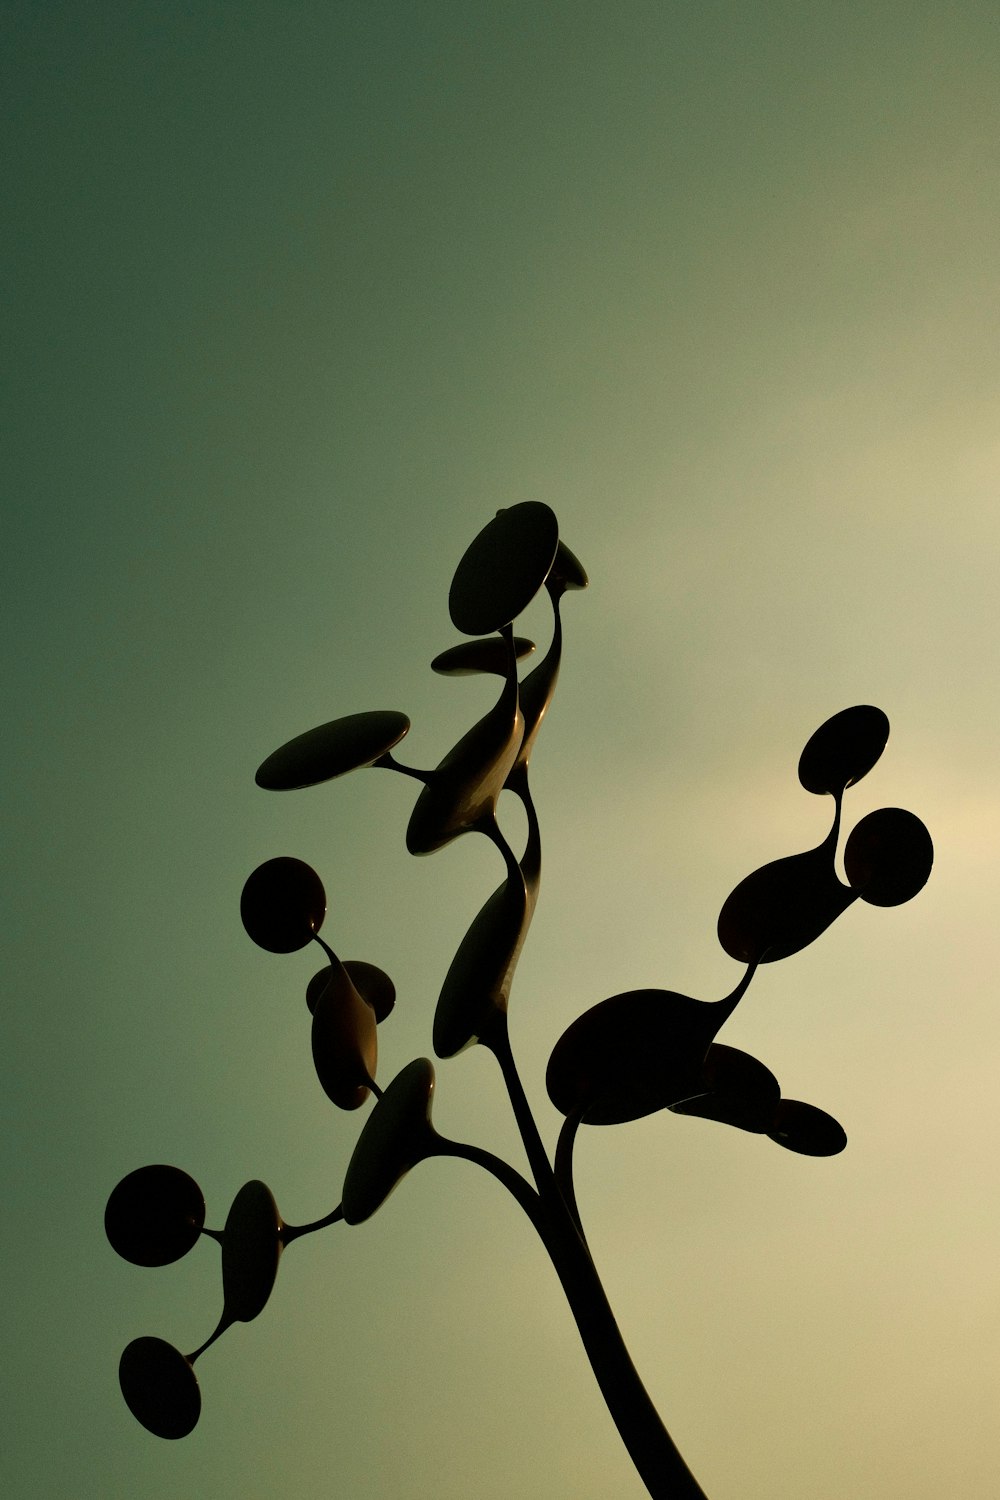 the silhouette of a plant against a blue sky